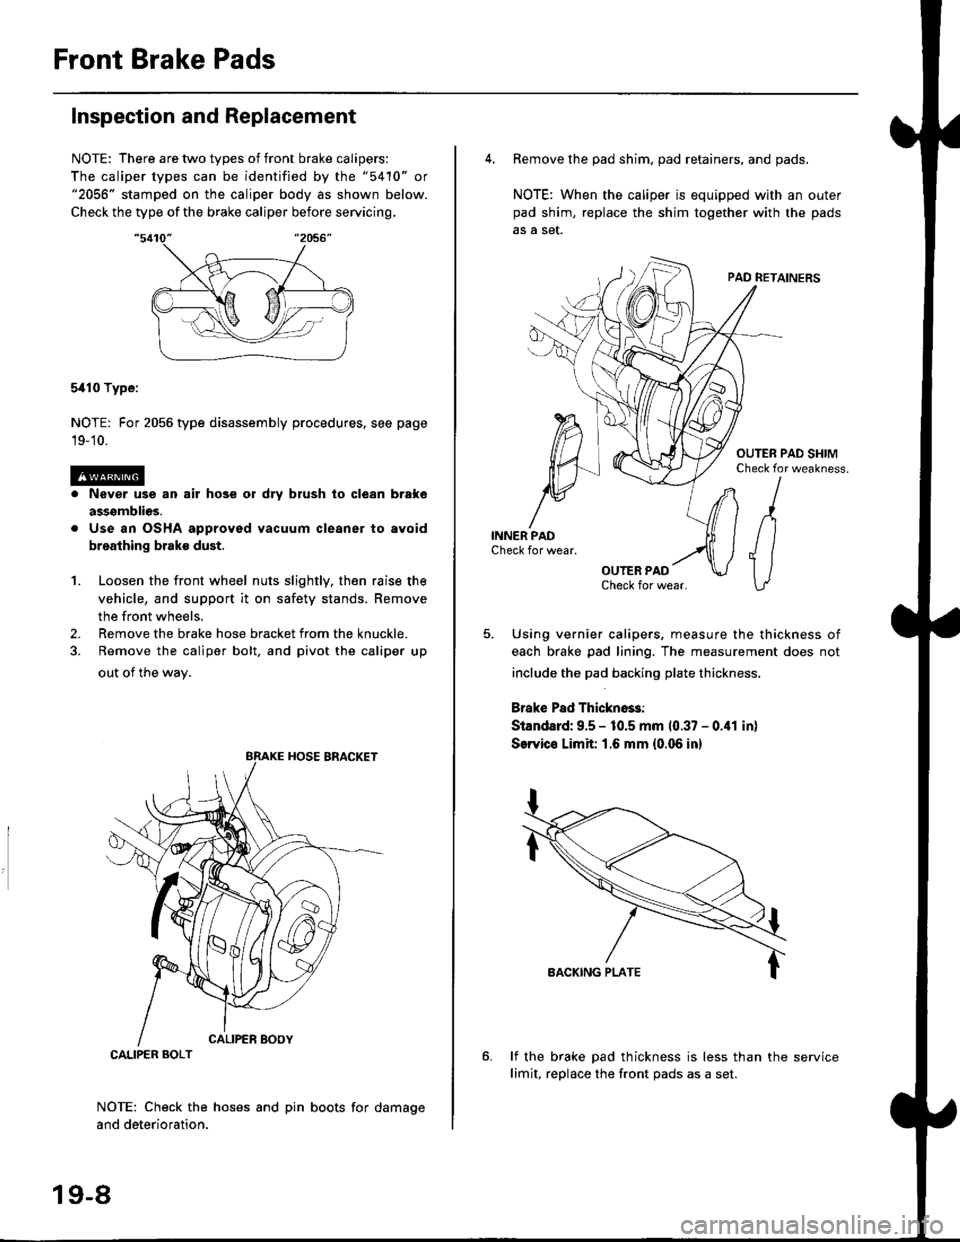 HONDA CIVIC 1996 6.G Service Manual Front Brake Pads
Inspection and Replacement
NOTE: There are two types of front brake calipers:
The caliper types can be identified by the "5410" or"2056" stamped on the caliper body as shown below.
Ch